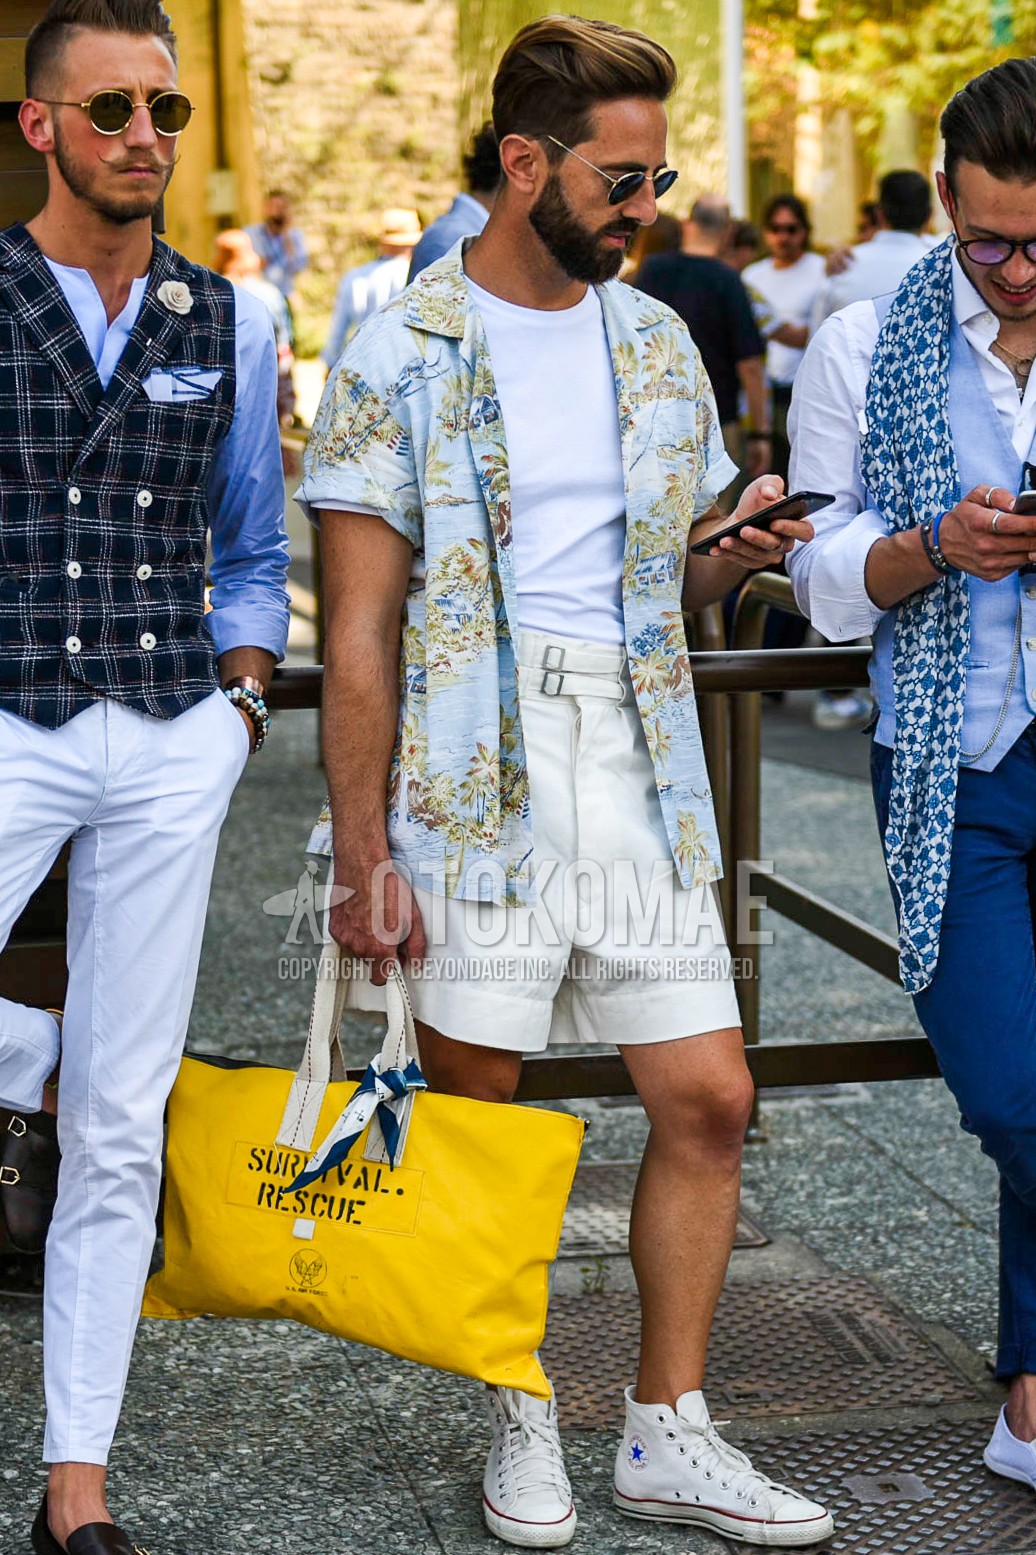 Men's summer outfit with black gold plain sunglasses, light blue tops/innerwear shirt, white plain t-shirt, white plain short pants, white high-cut sneakers, yellow graphic briefcase/handbag.